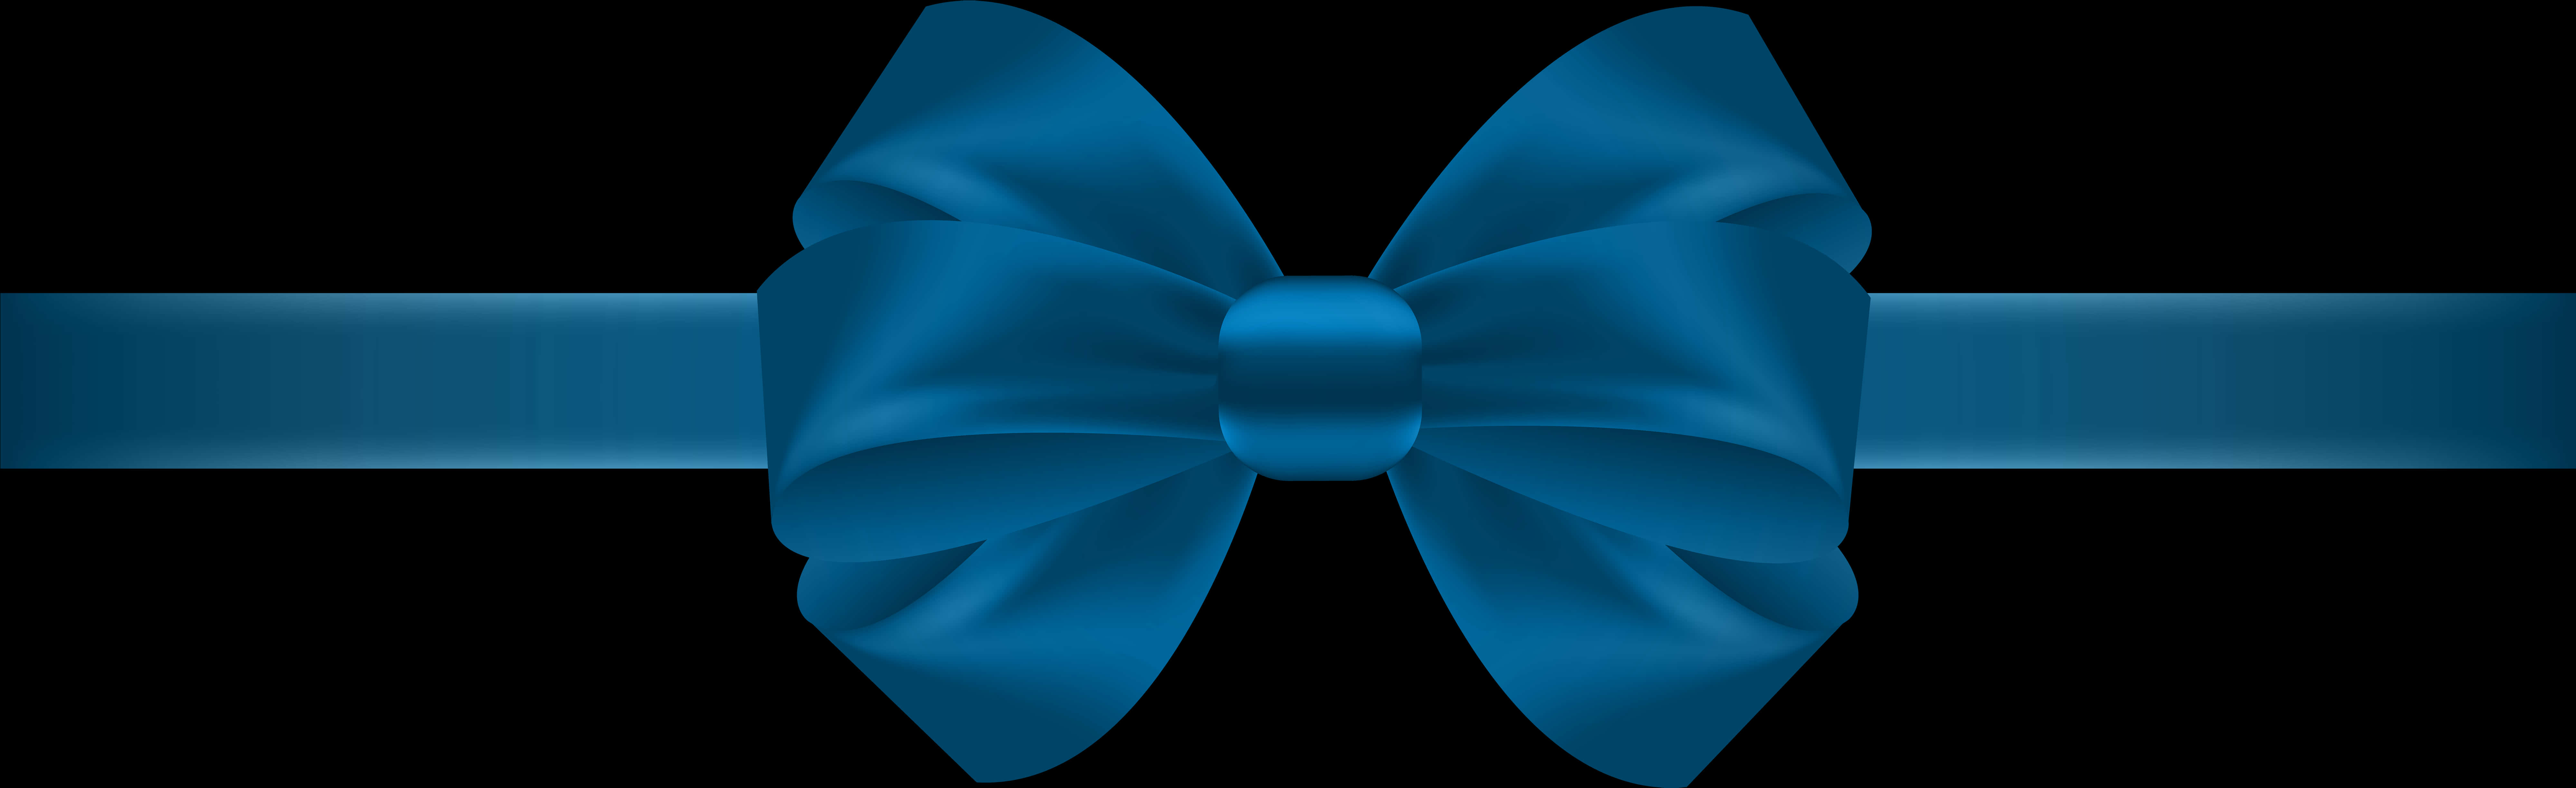 Blue Satin Bow Tie PNG image